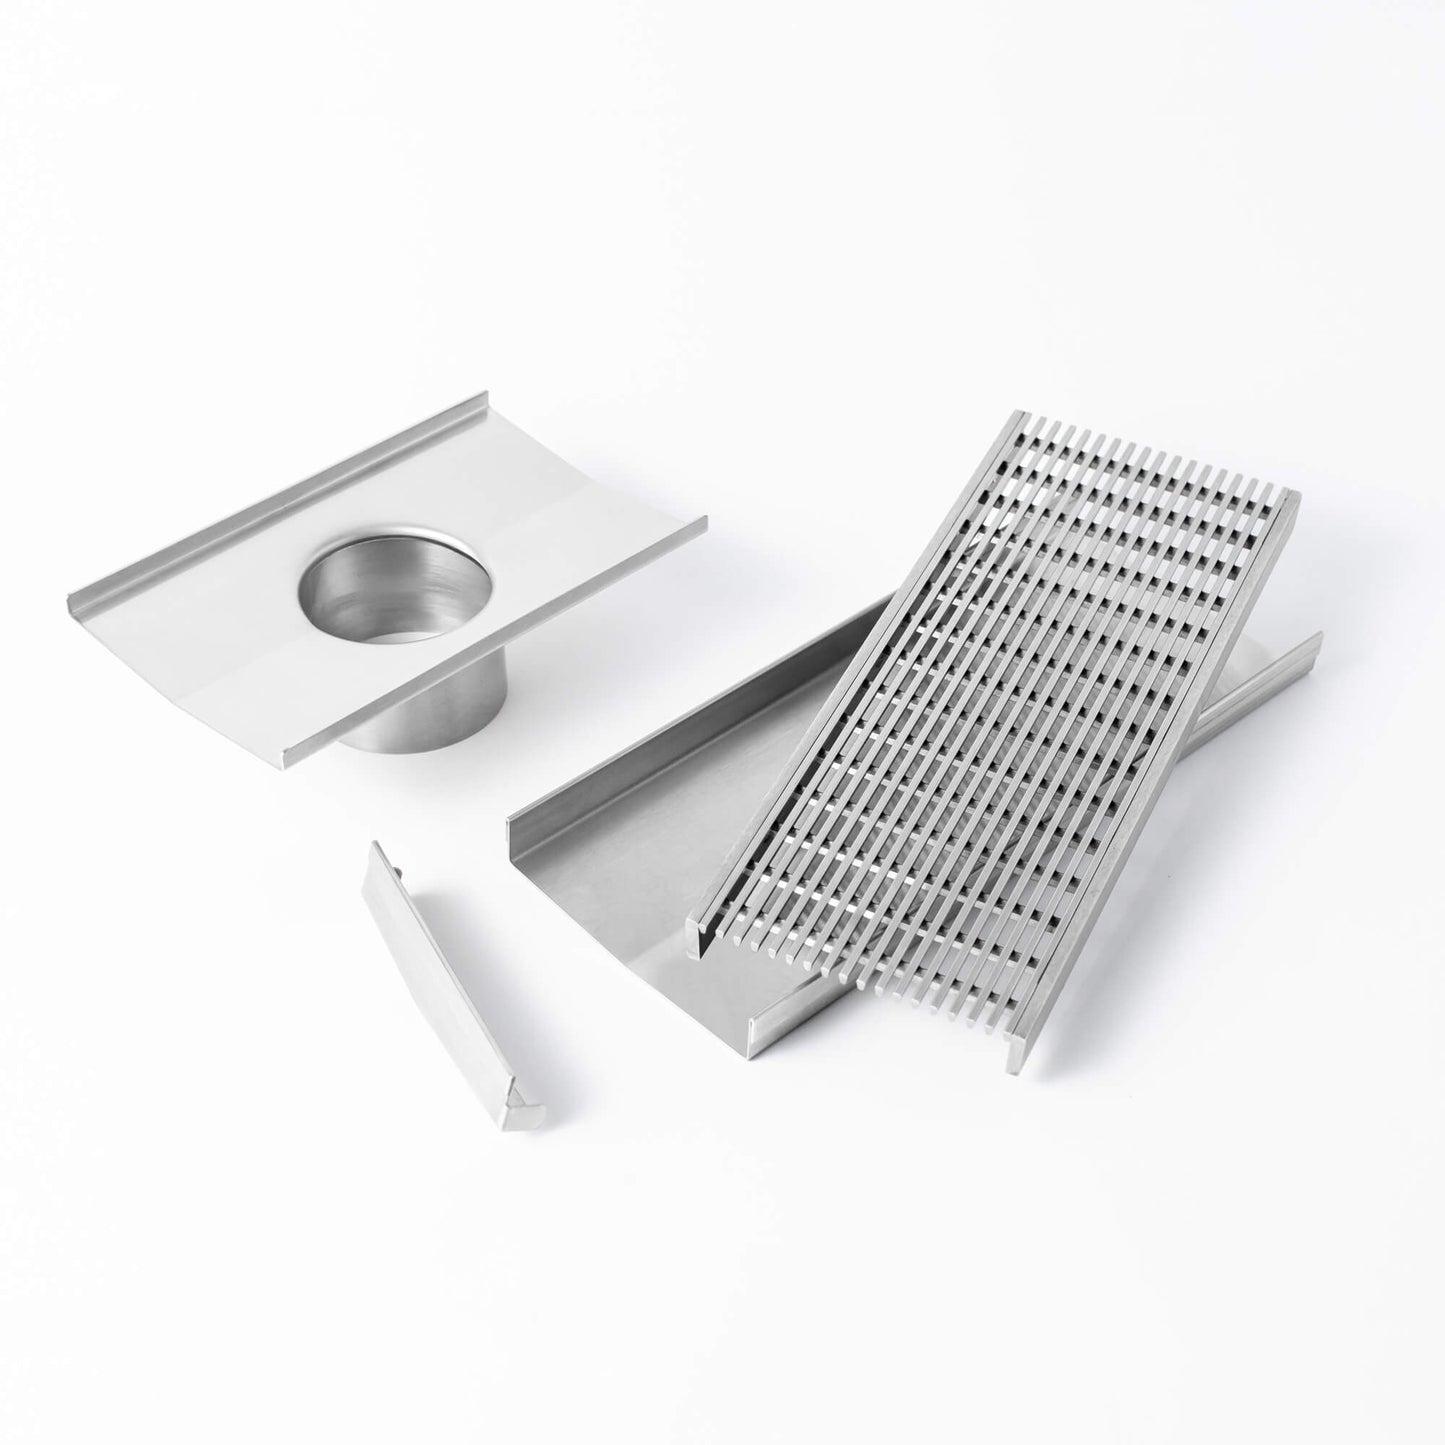 Stainless Steel Modular Grate & Channel 125mm x 25mm